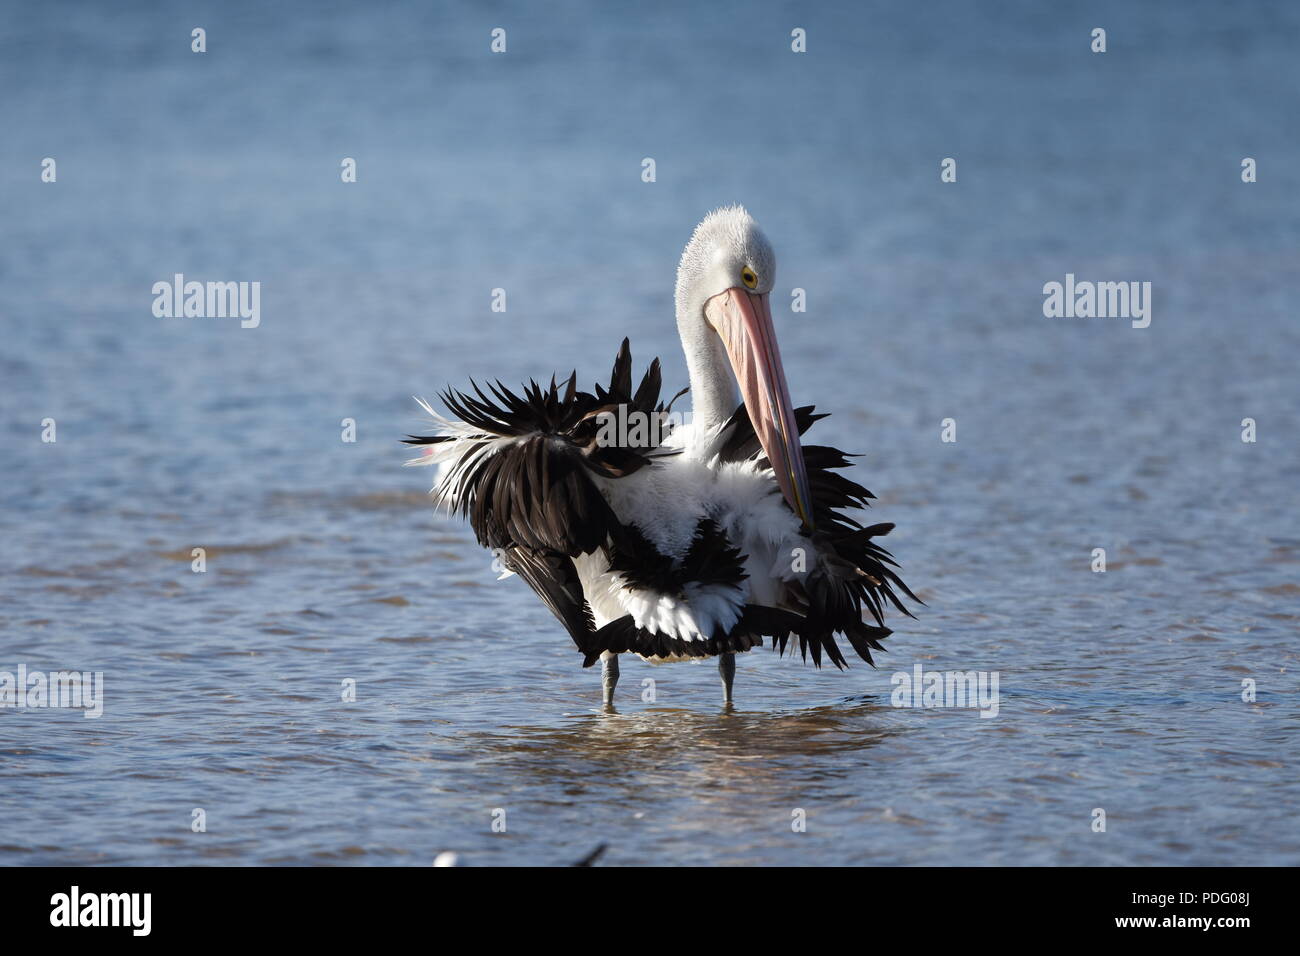 Pelicans,Pelicans are a genus of large water birds that make up the family Pelecanidae. Stock Photo